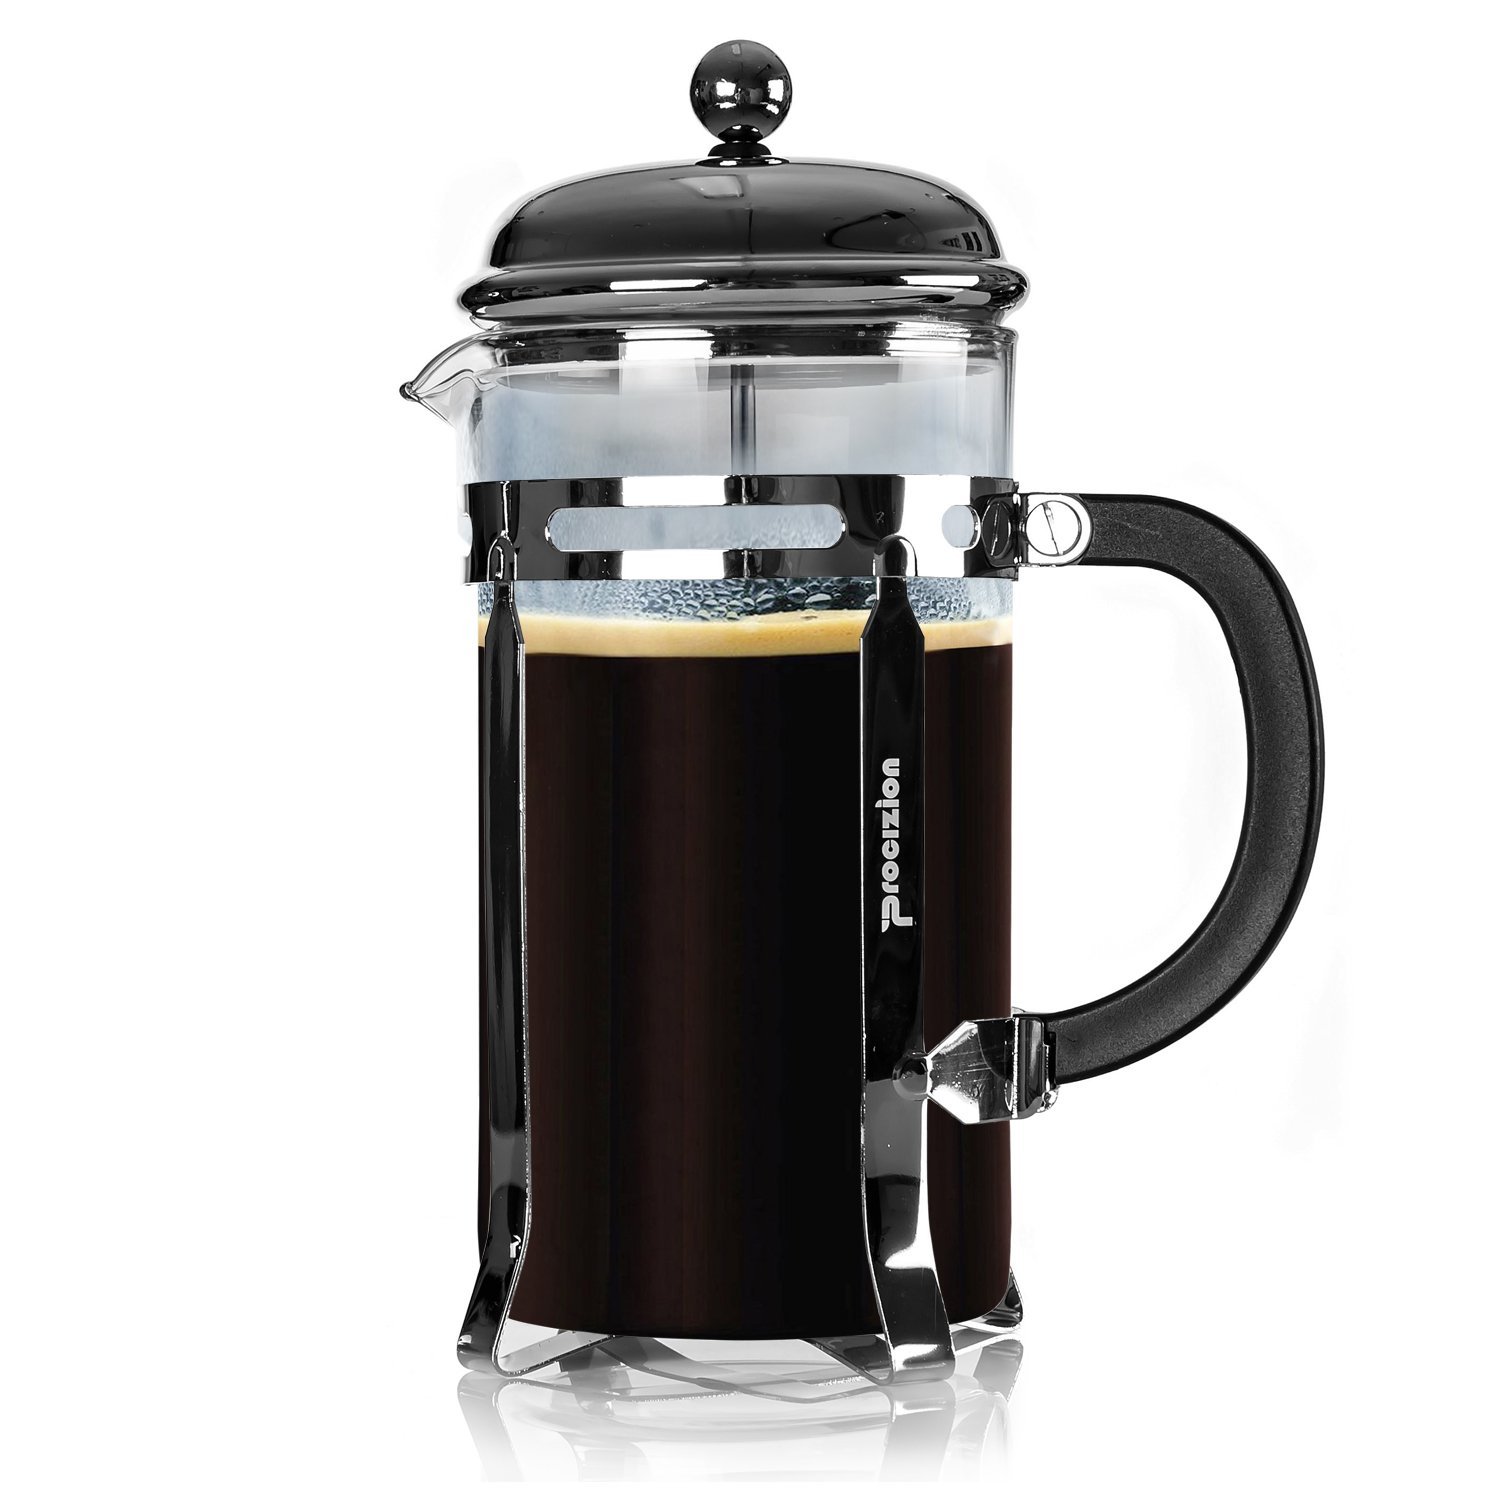  Gorgeous [8 Cup] French Press Coffee Maker & Tea Maker